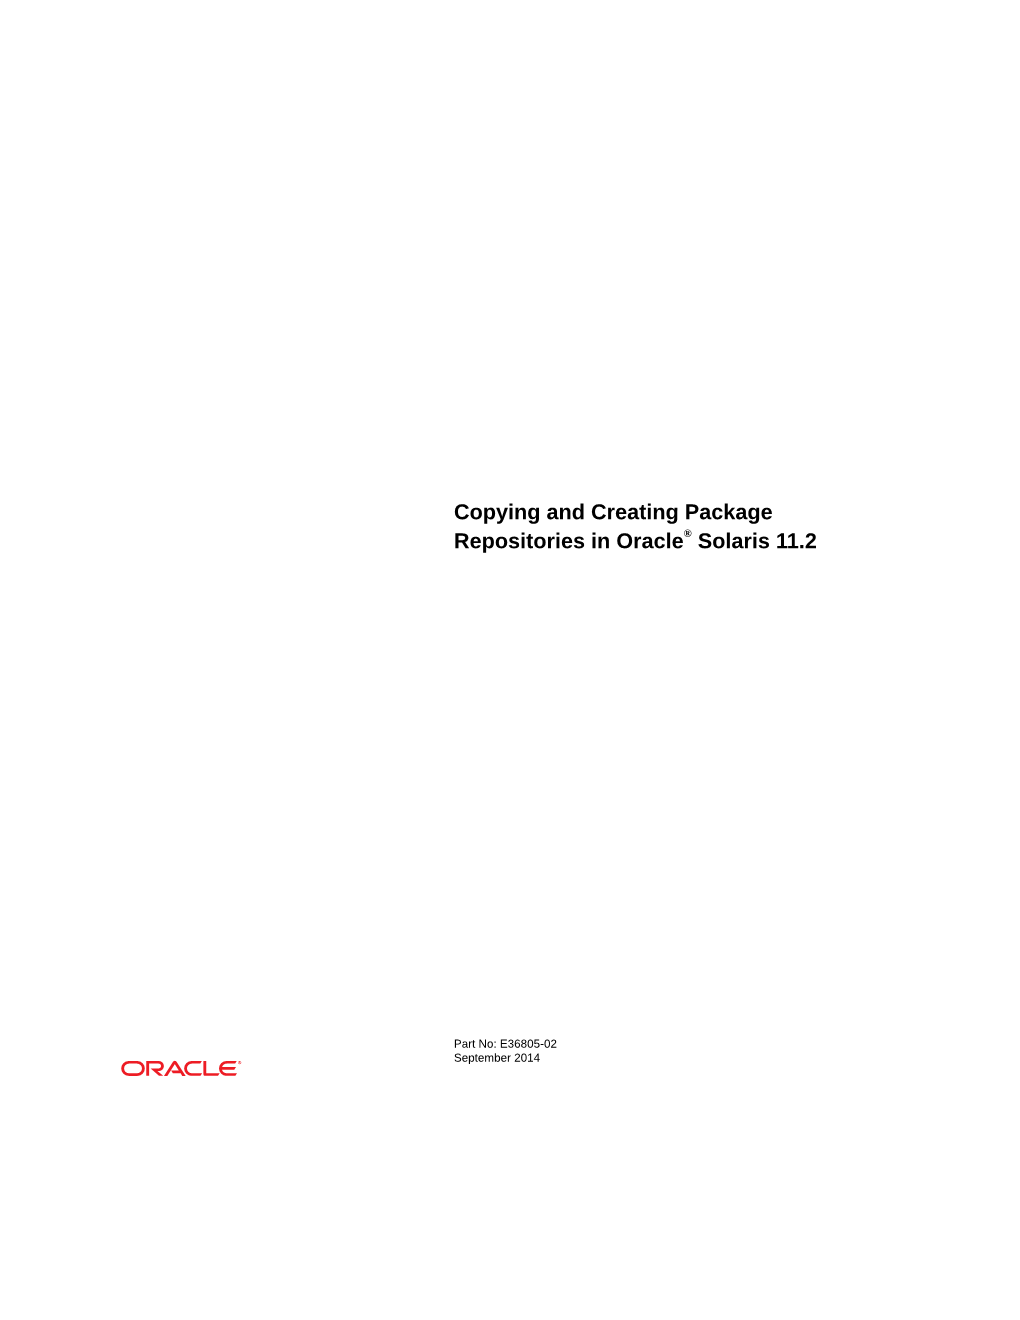 Copying and Creating Package Repositories in Oracle® Solaris 11.2